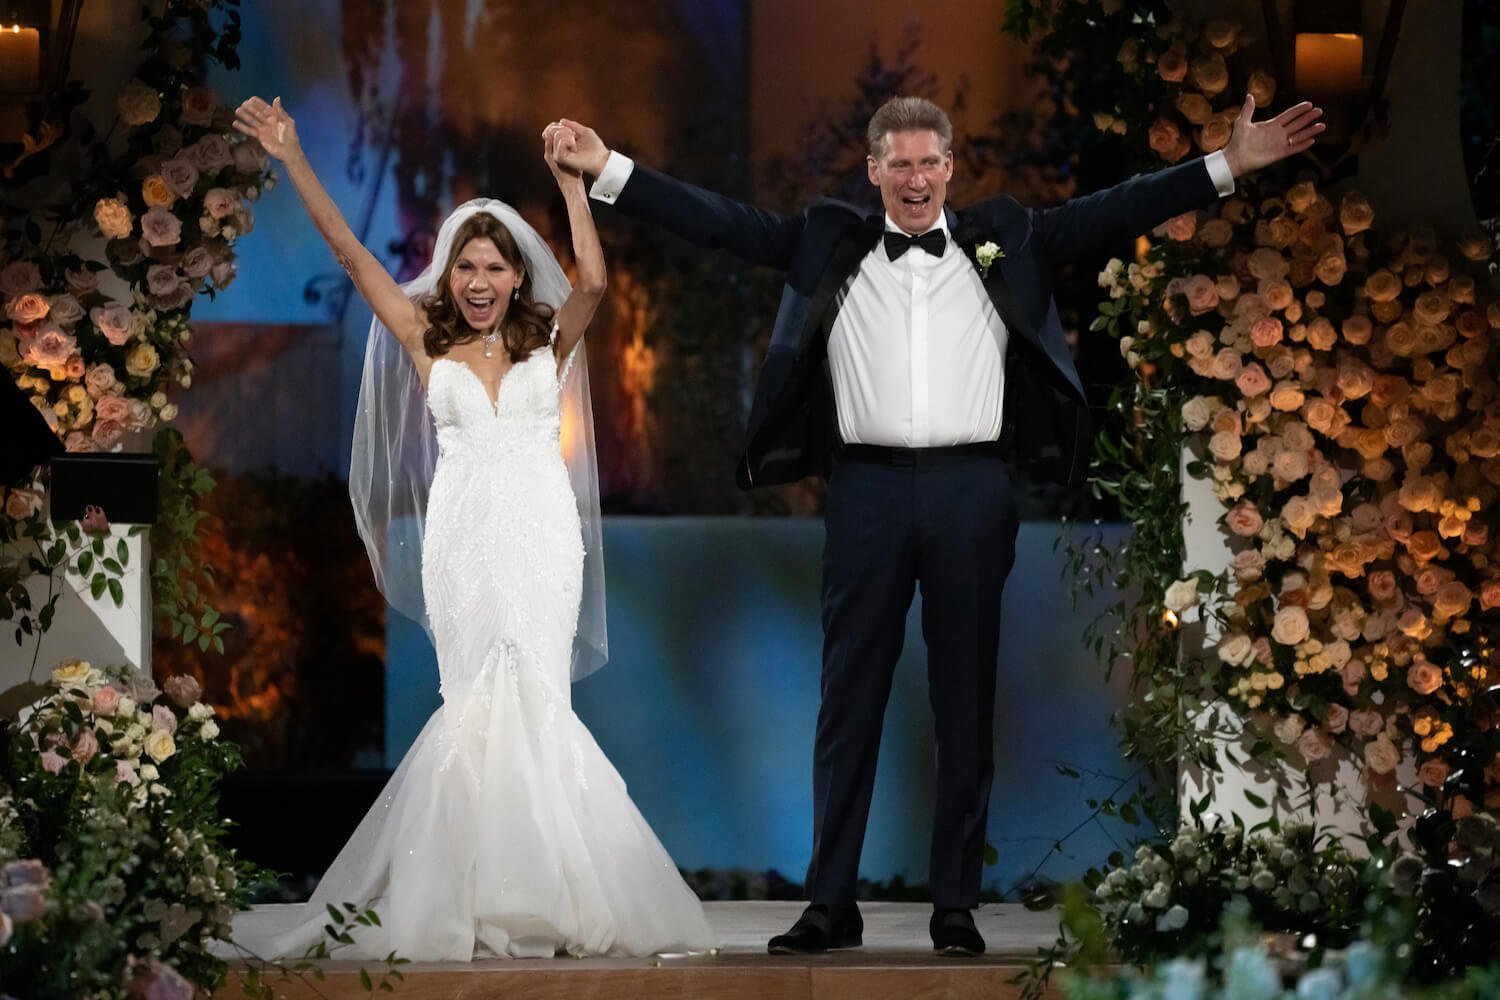 'The Golden Bachelor' wedding with Theresa Nist in a wedding gown and Gerry Turner in a tuxedo. They appear excited with their arms raised.